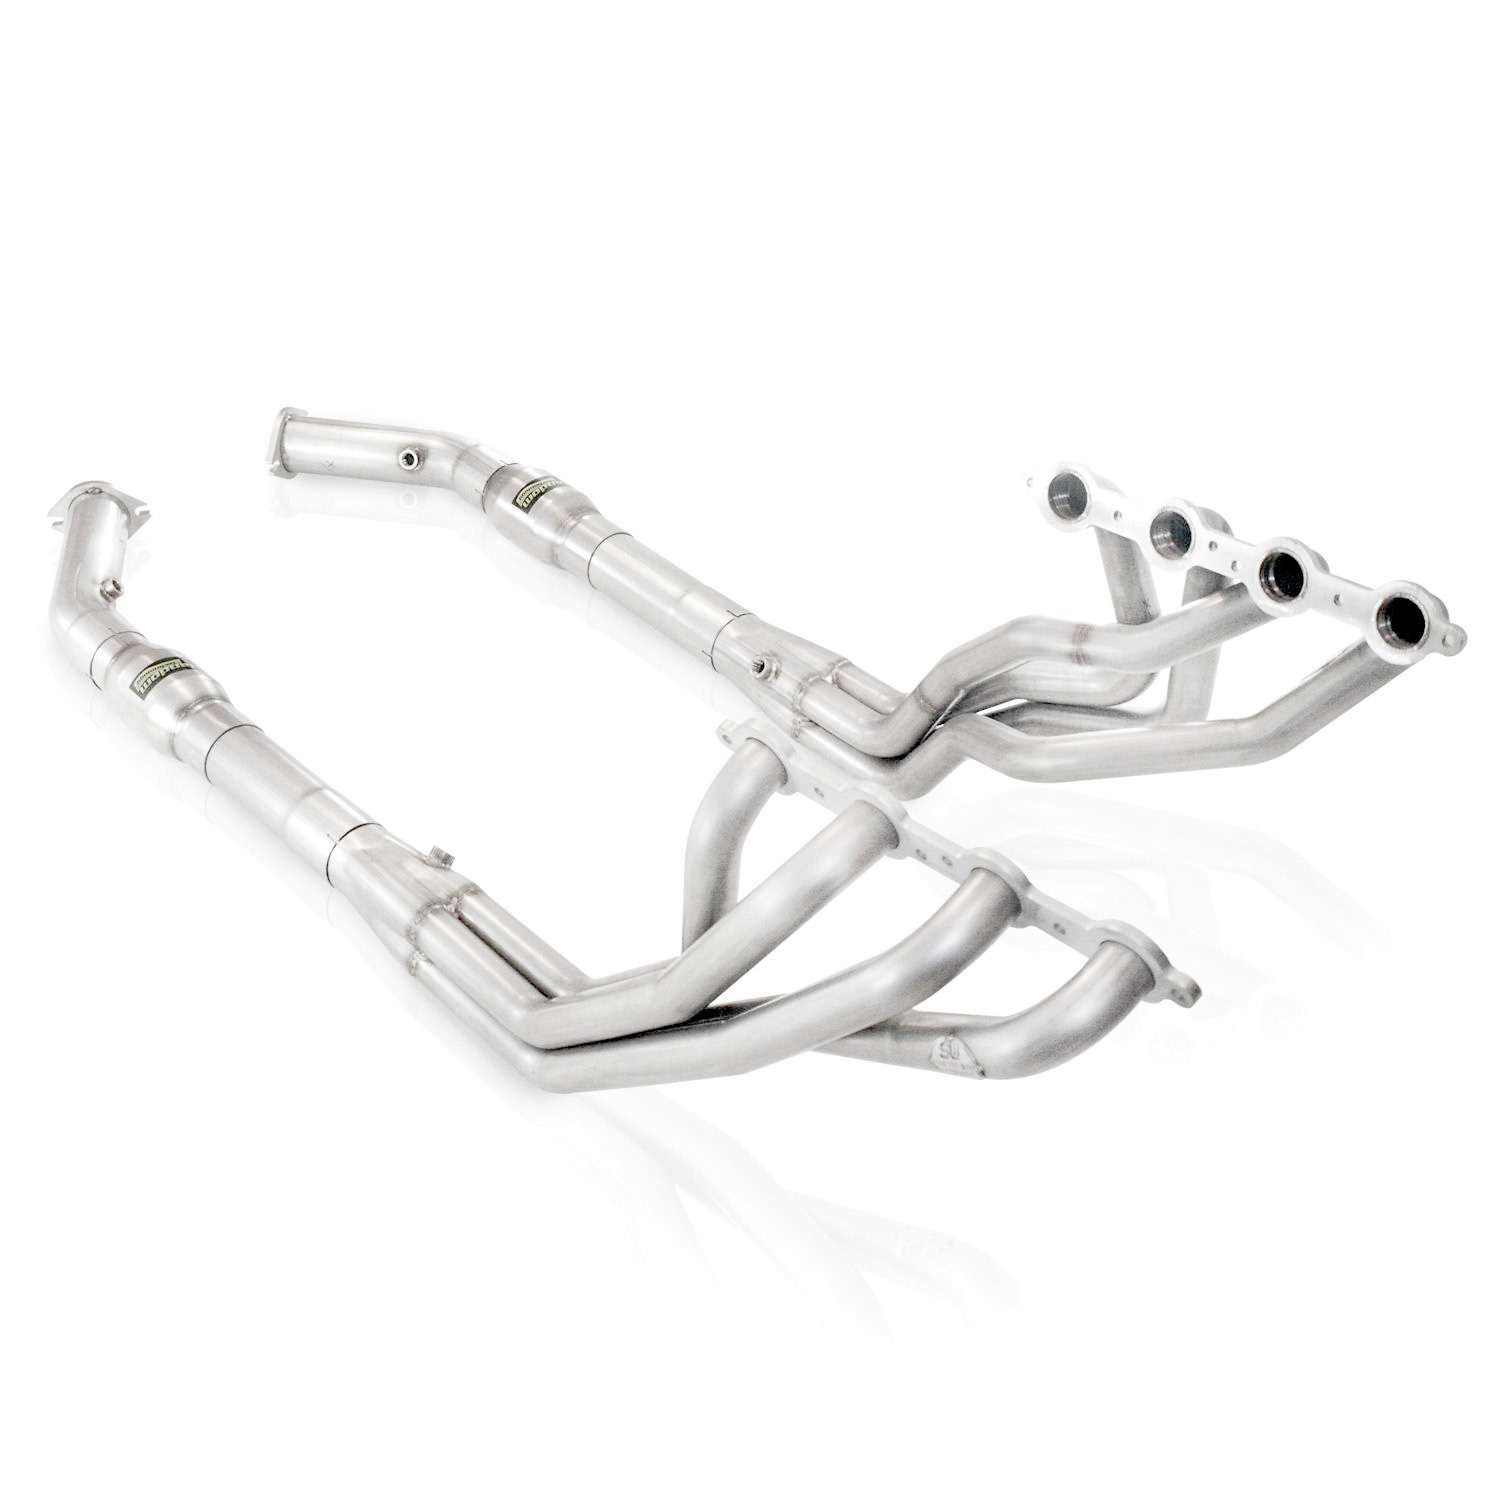 2004 GTO 5.7L SW Headers 1-3/4" With Catted Leads Factory Connect